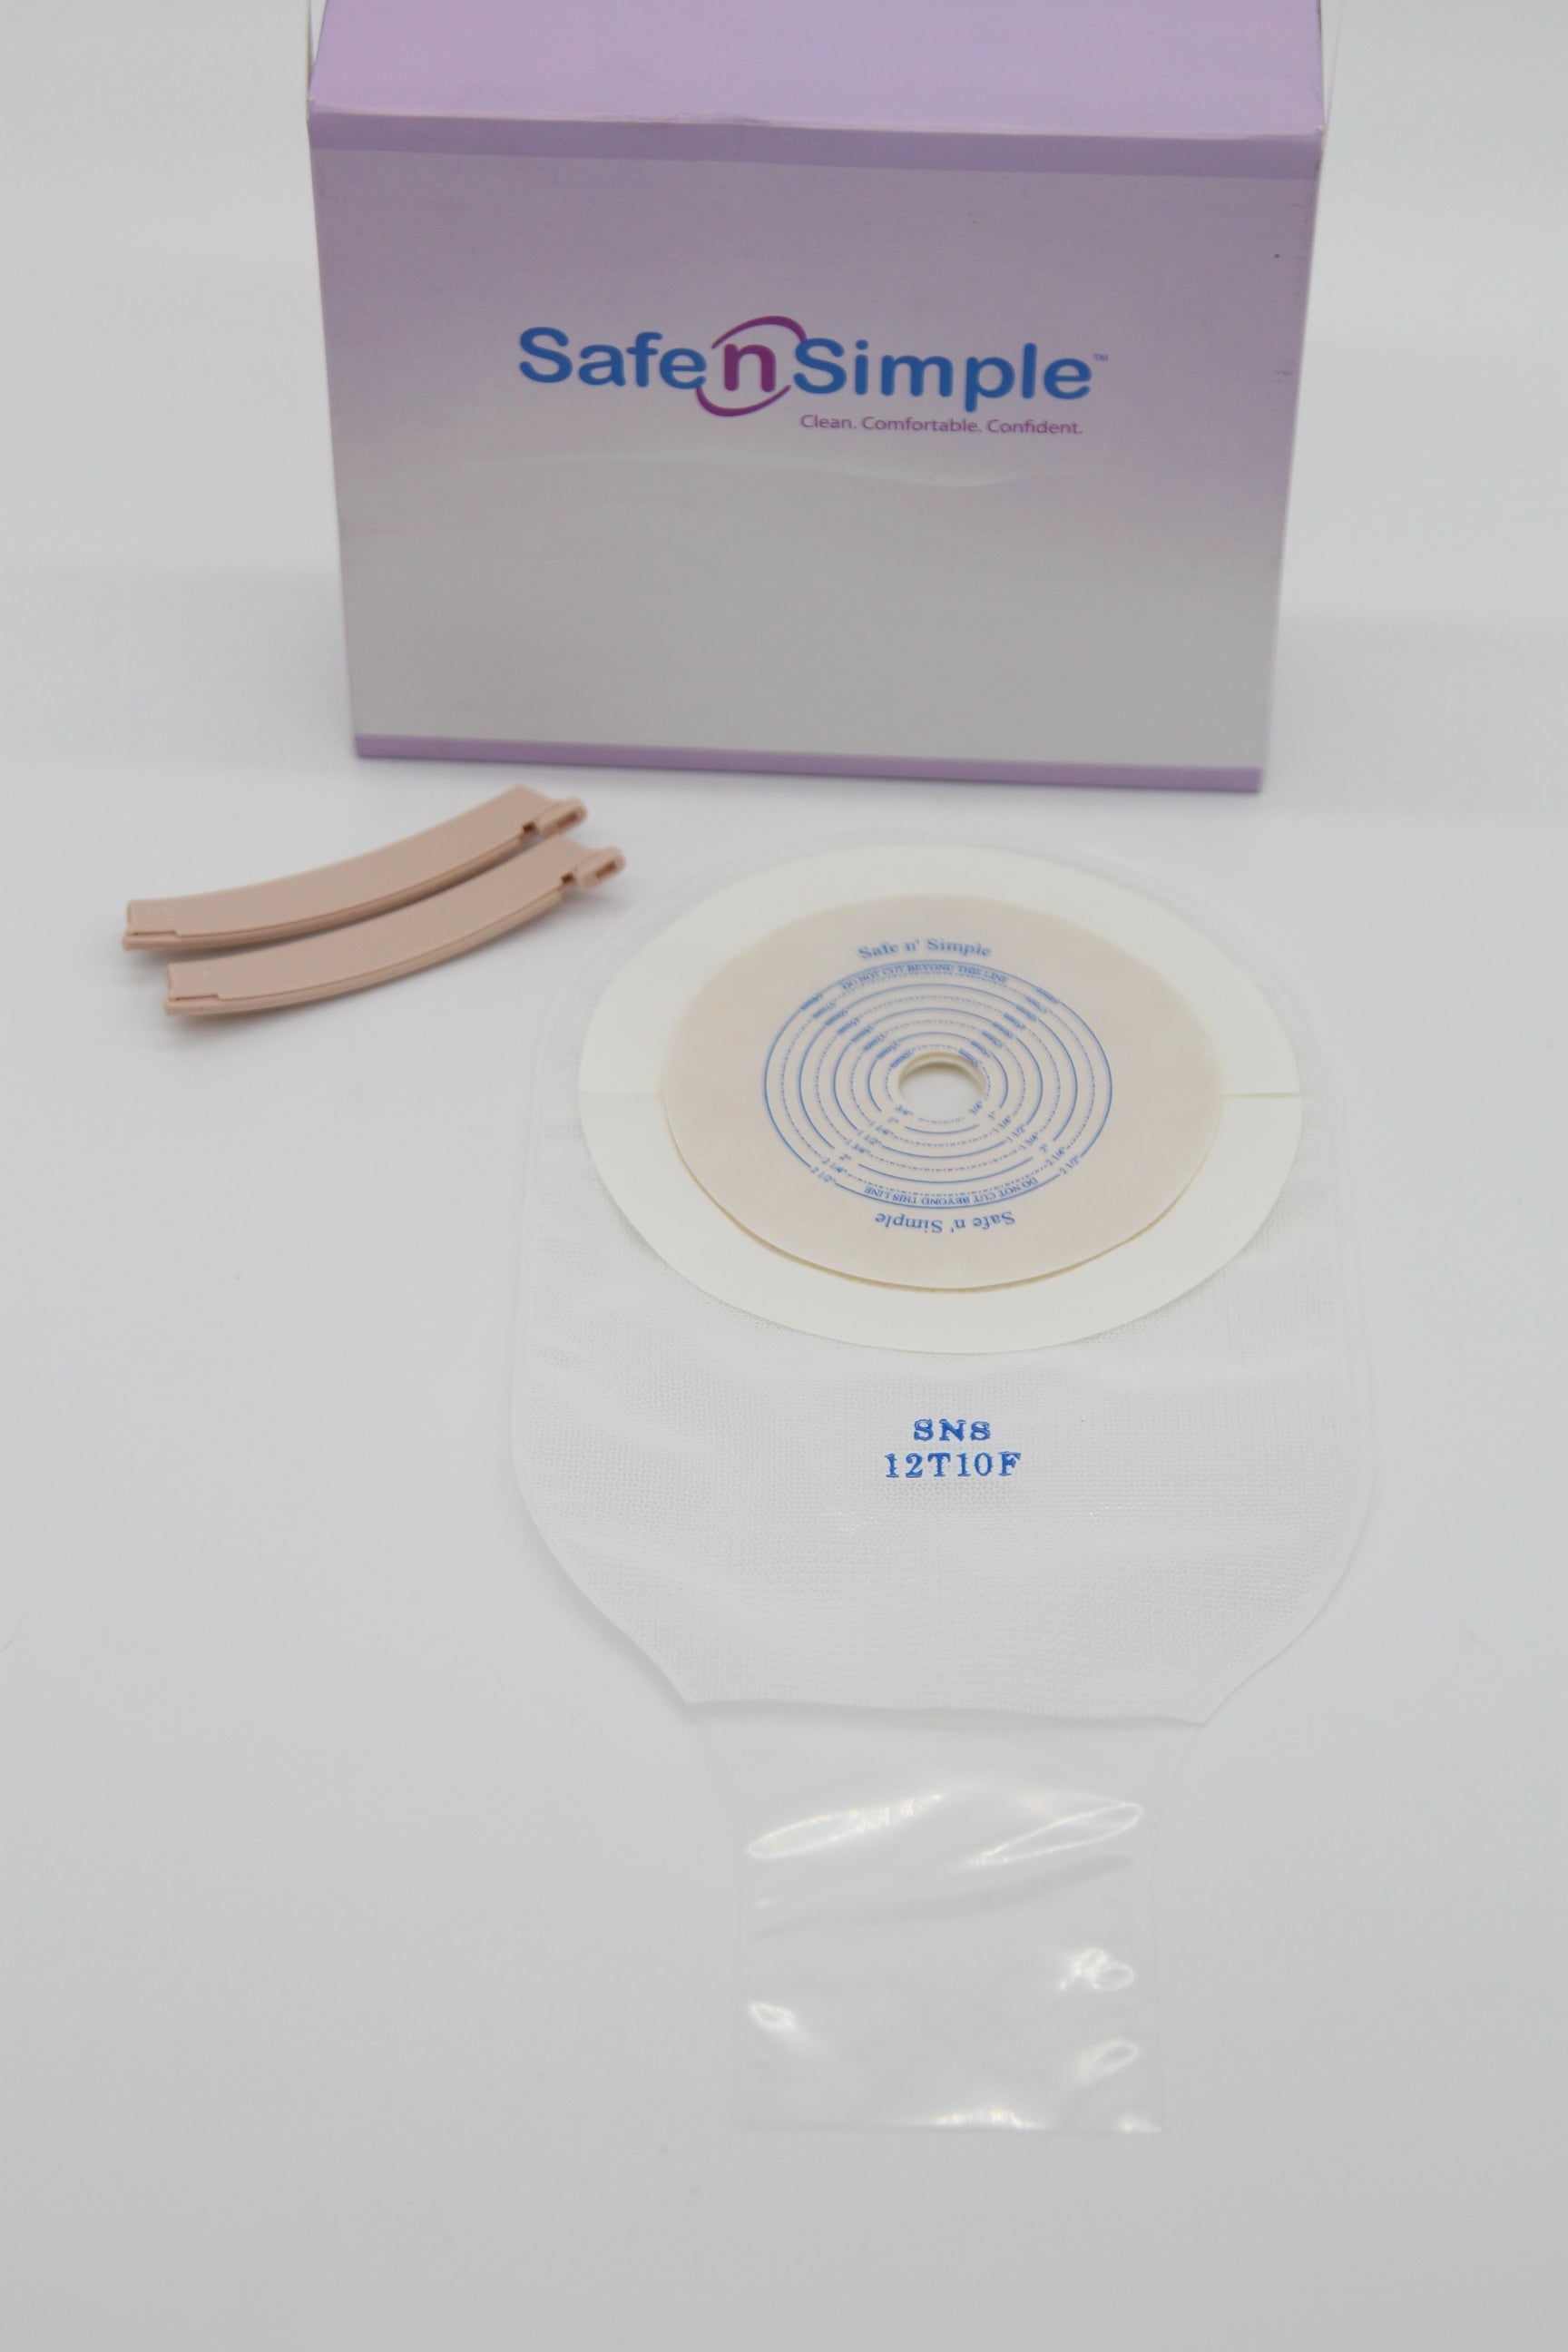 Drainable Pouch - One Piece | Colostomy Bags | Urinary catheter